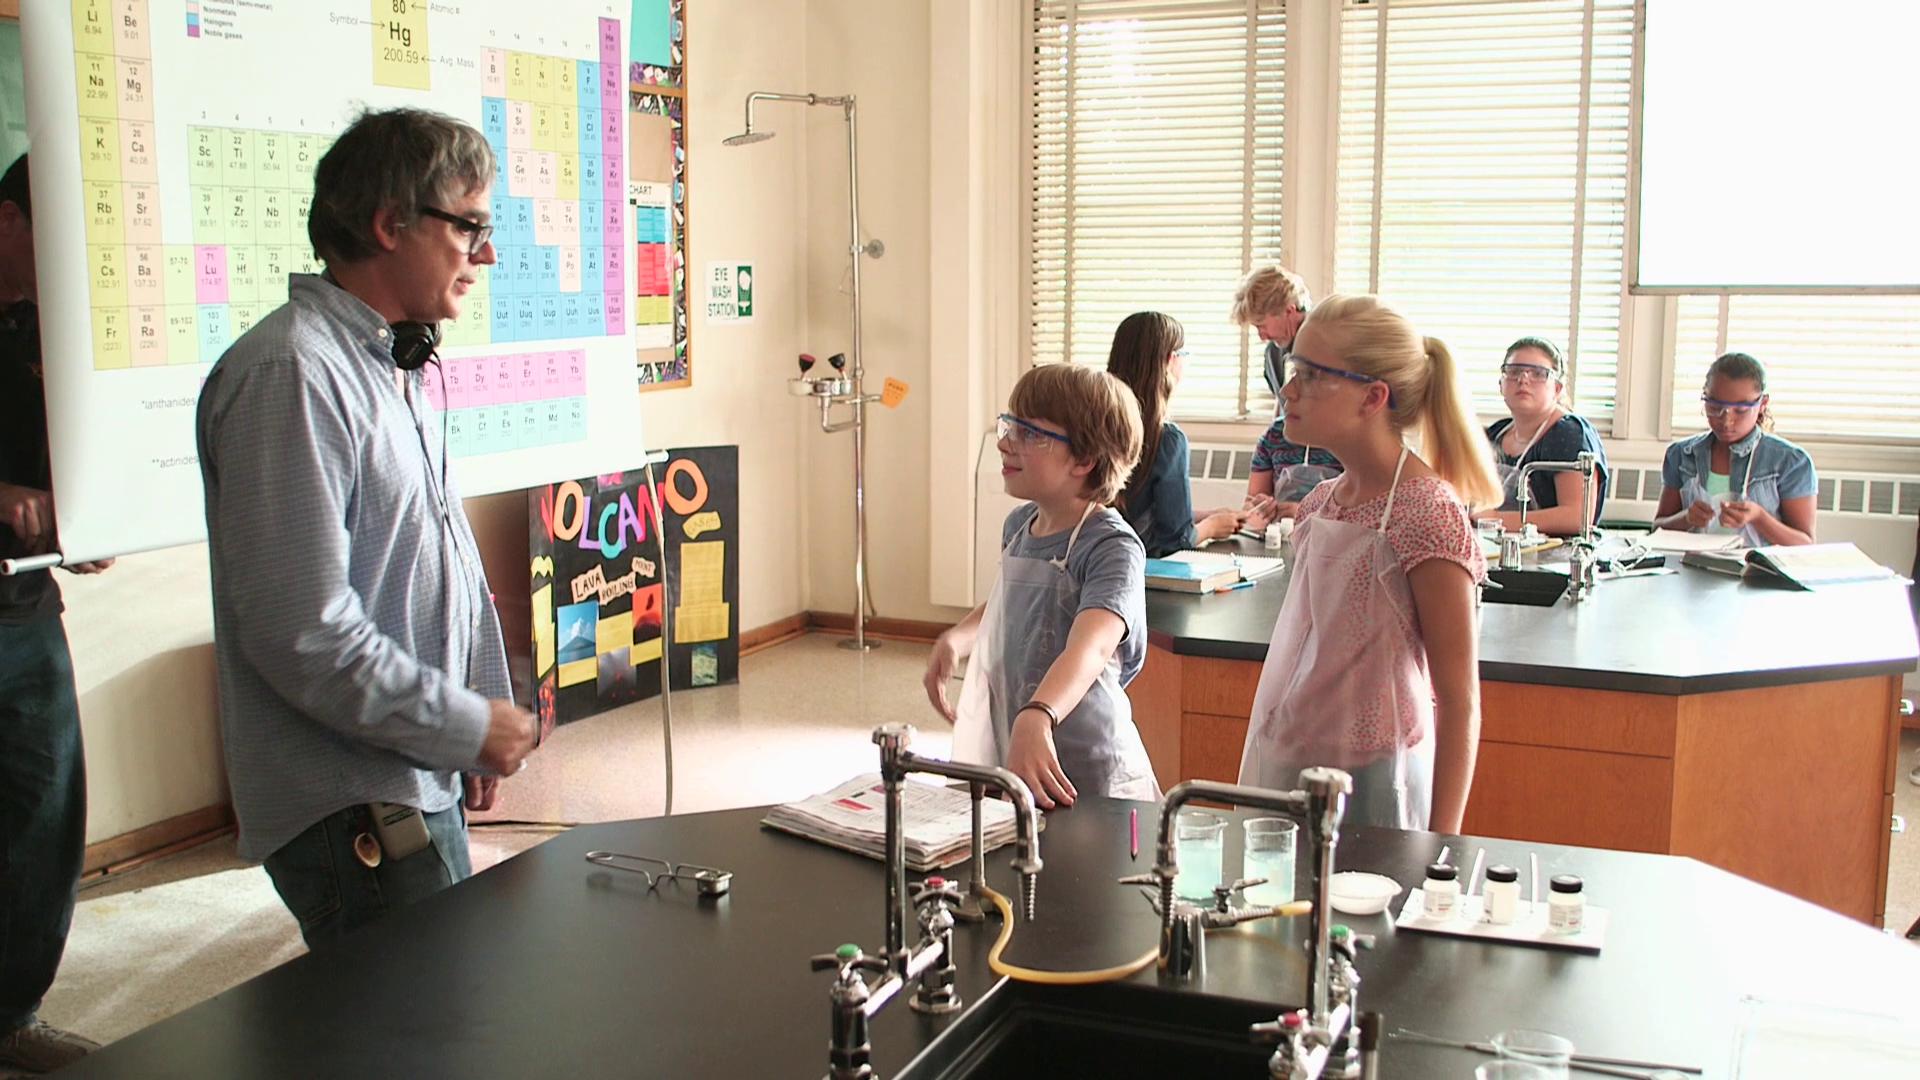 Ed Oxenbould in Alexander and the Terrible, Horrible, No Good, Very Bad Day